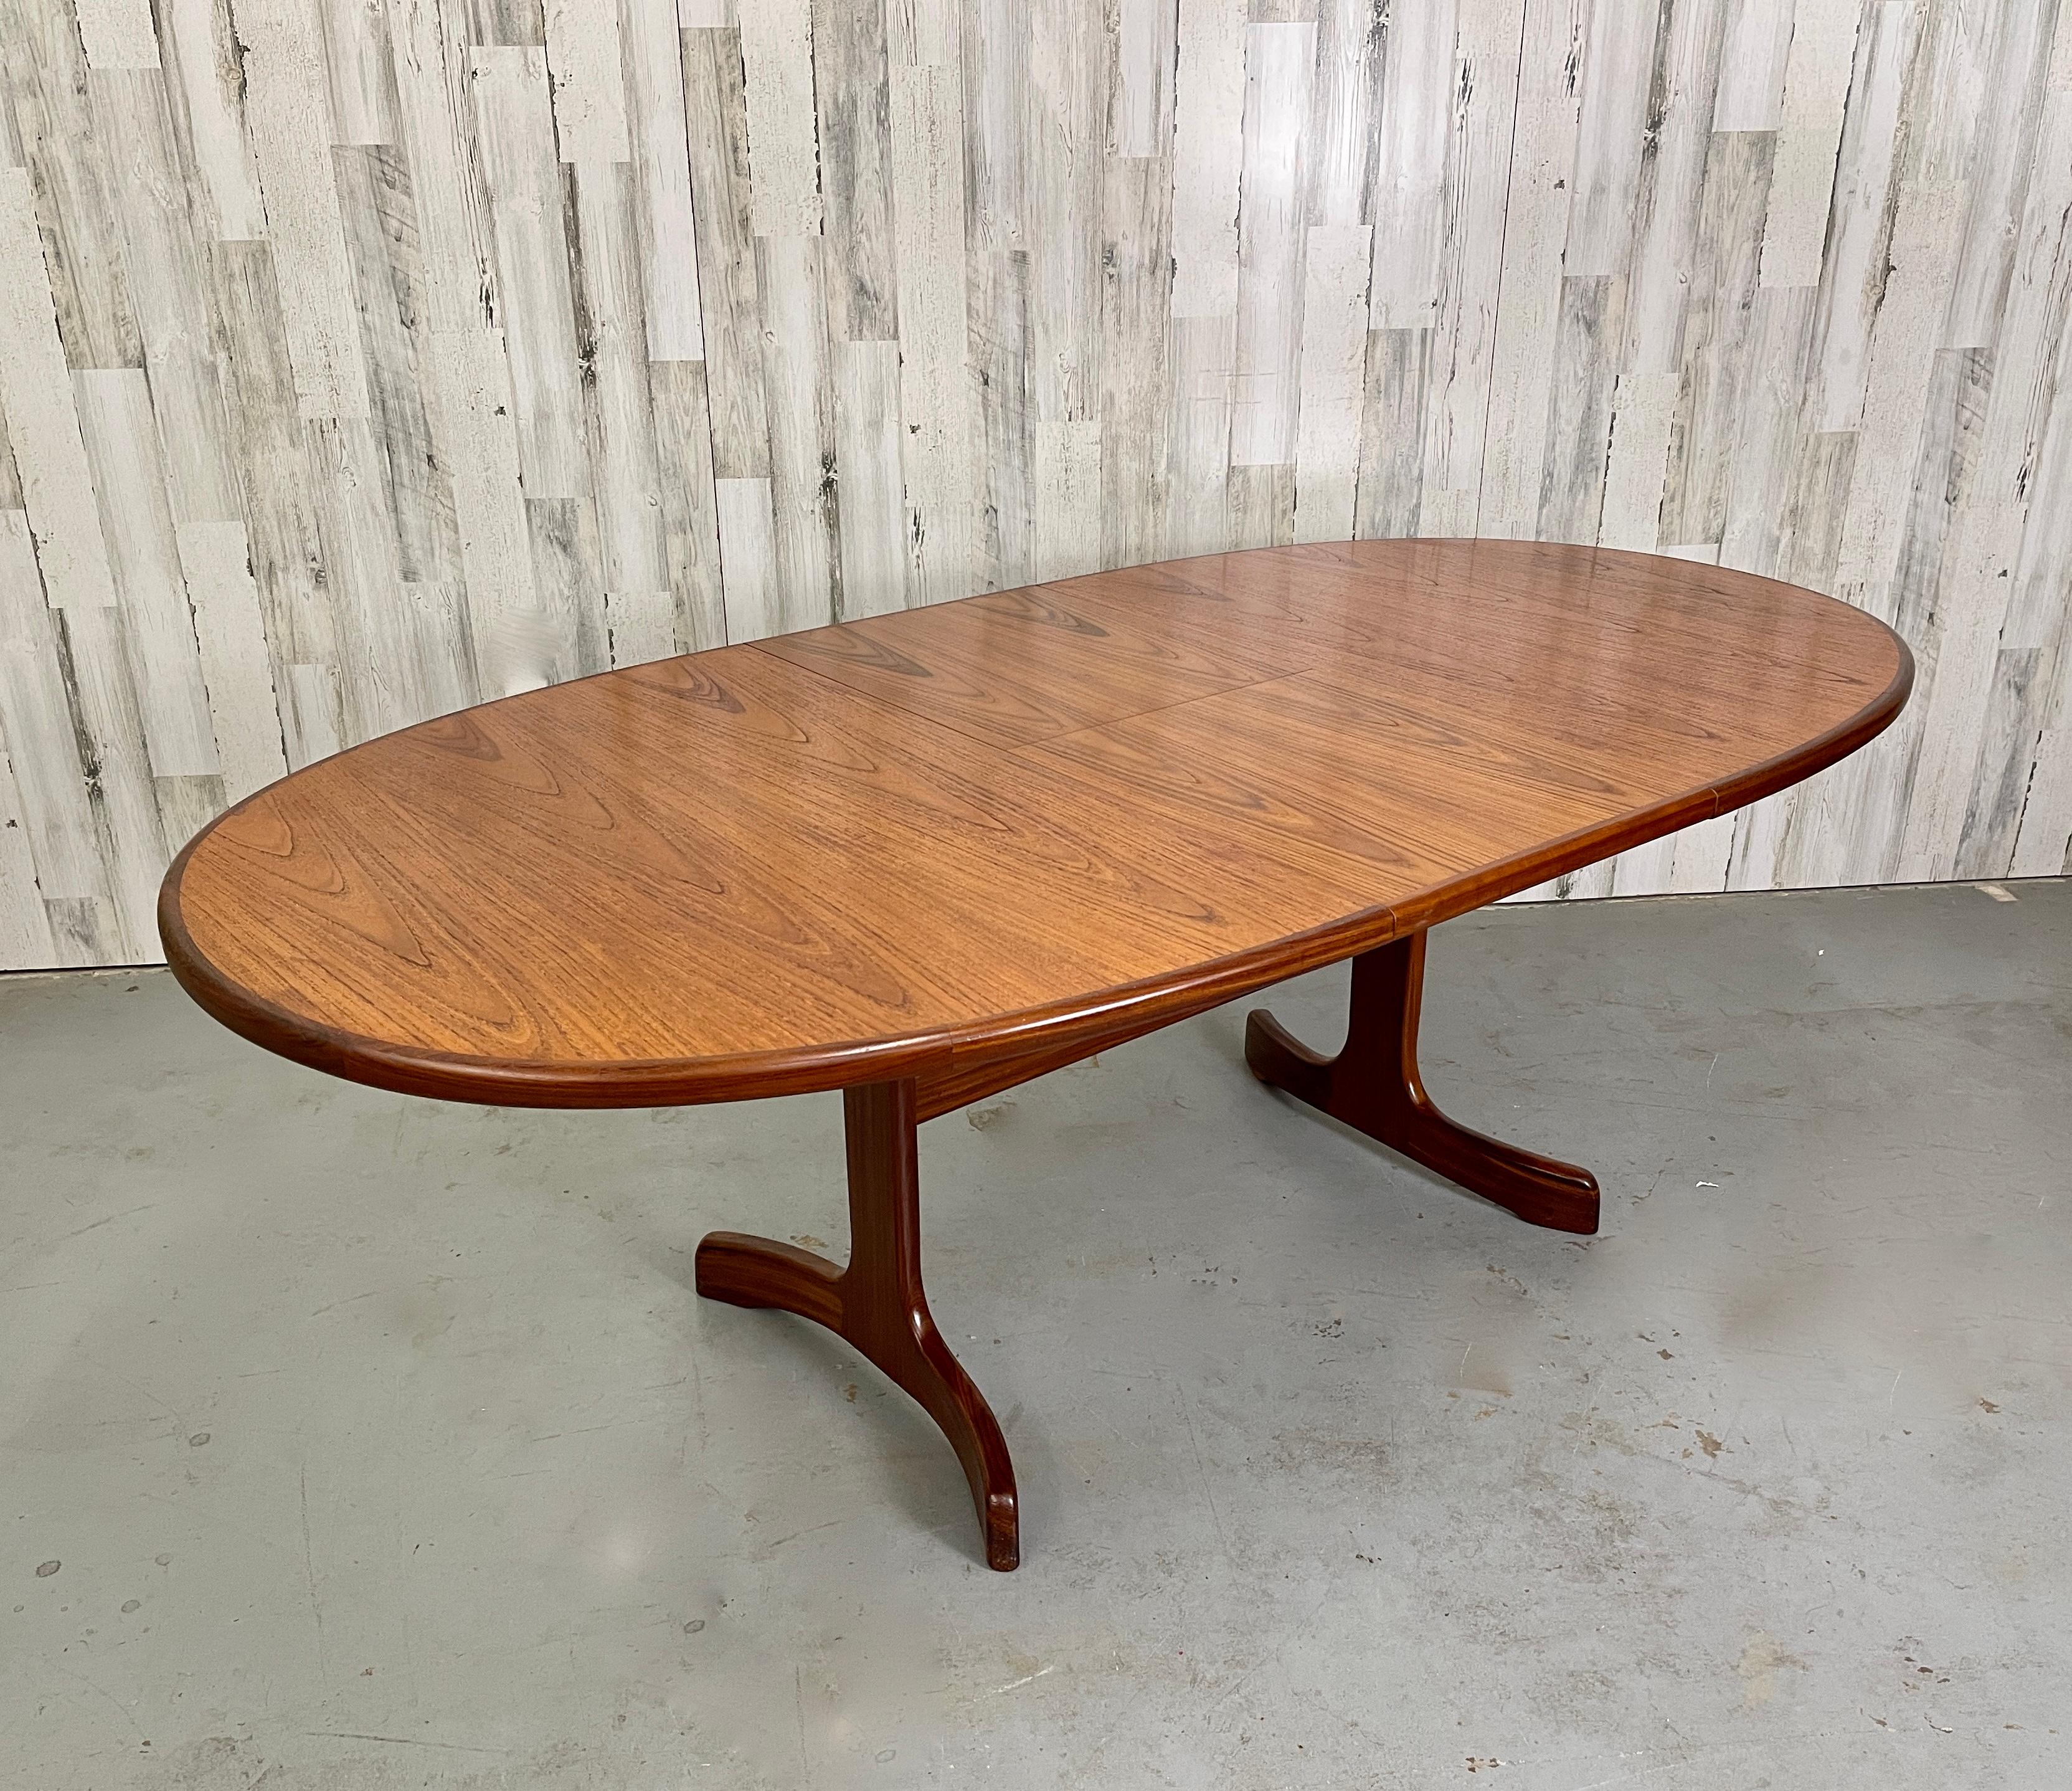 g plan dining table